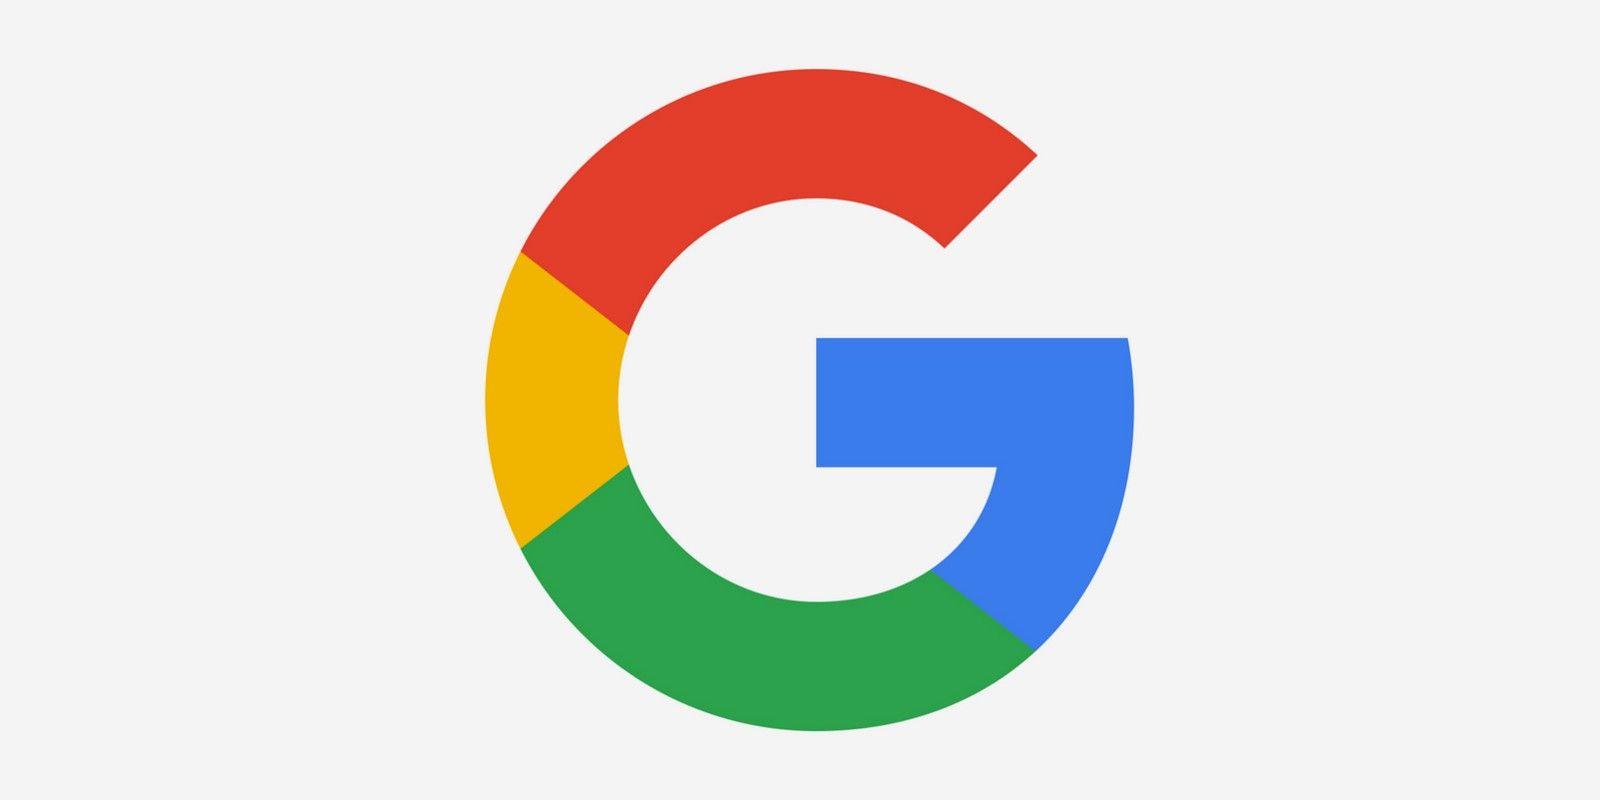 4 Color Logo - Best and Worst of Google Visual Designs